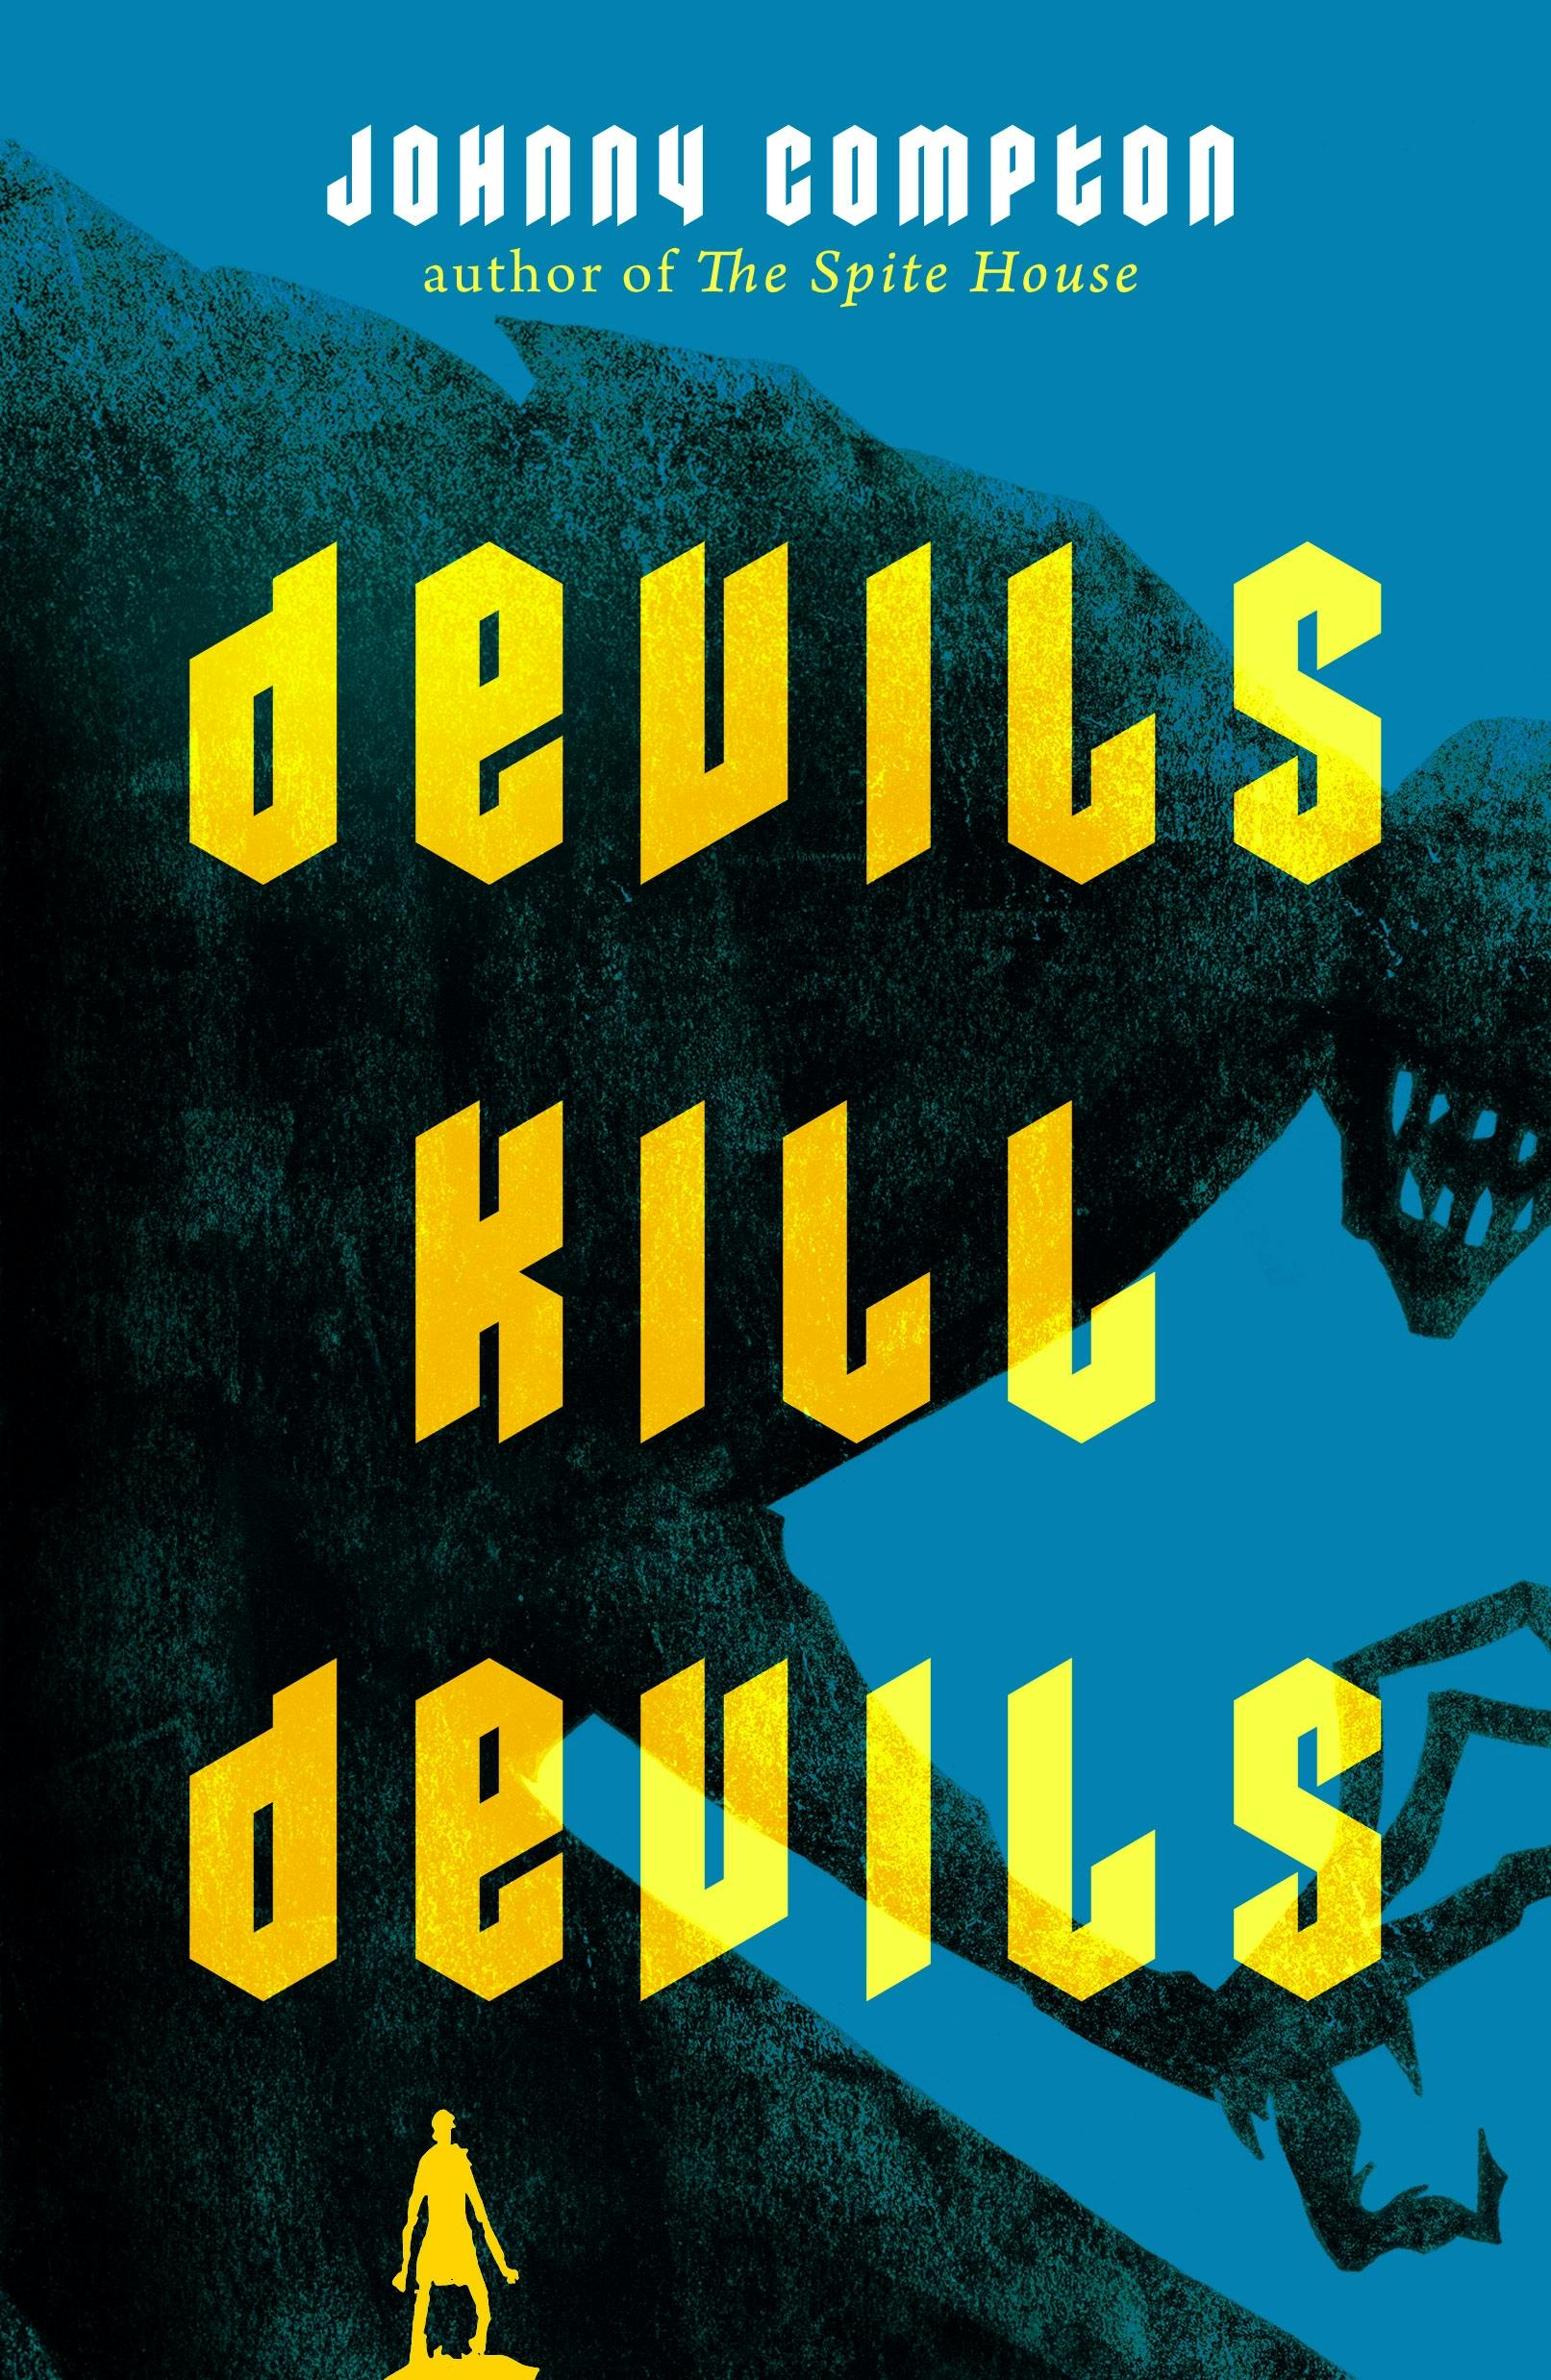 Cover for the book titled as: Devils Kill Devils